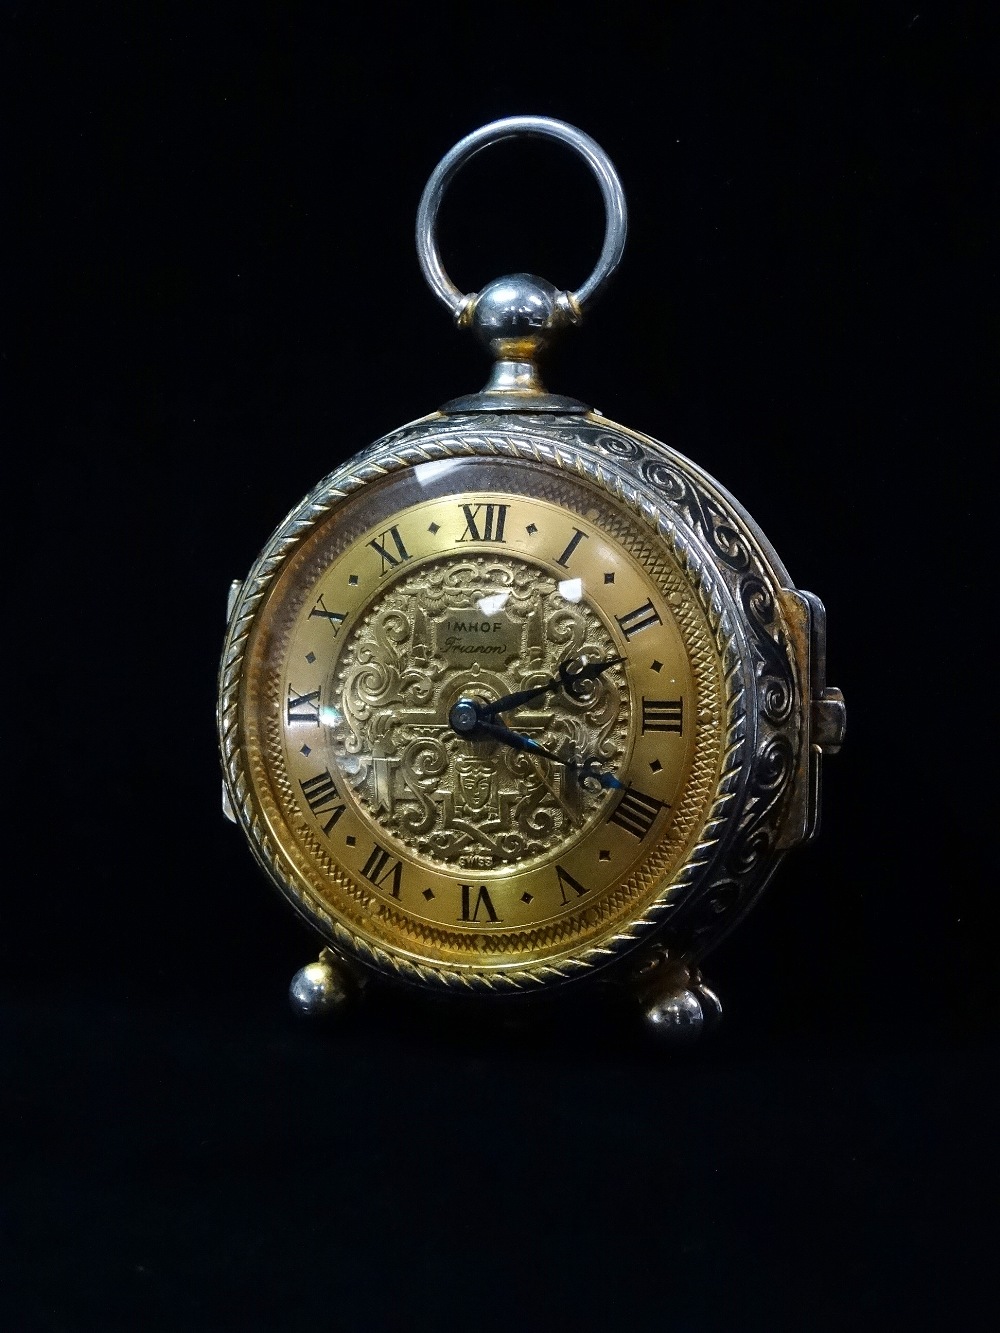 An Imhof Trianon Swiss 15 jewel eight day travelling alarm clock, in the form of an 18th century